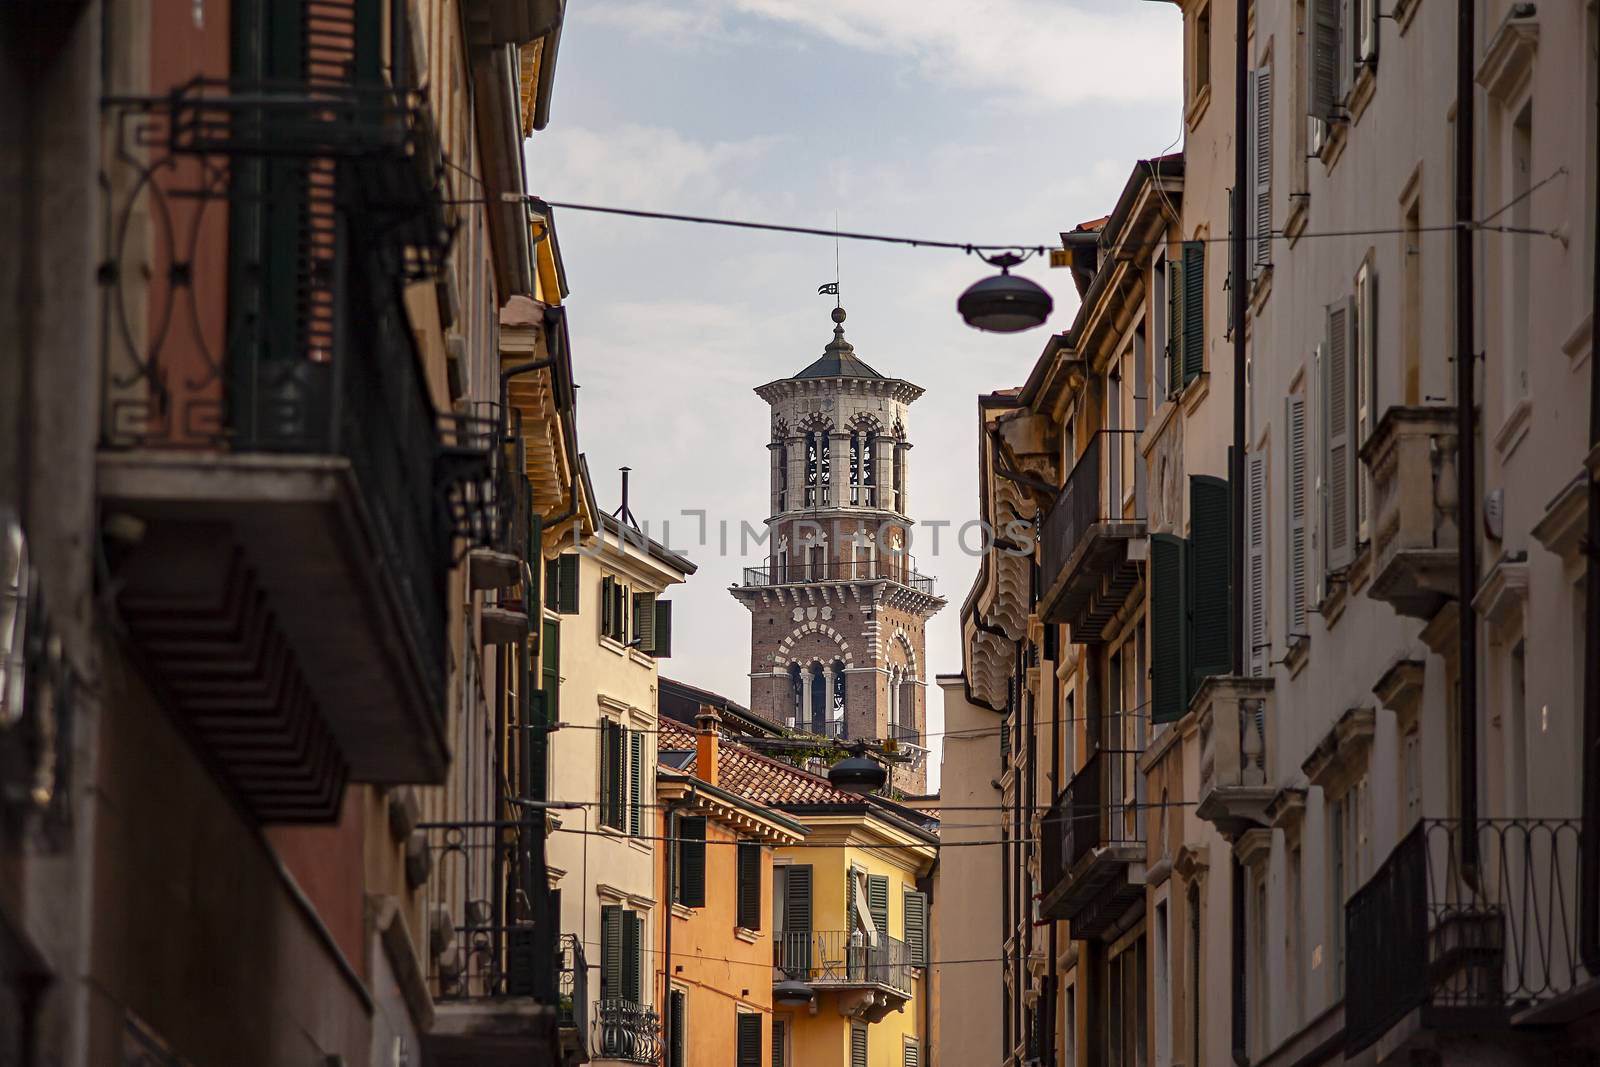 Verona Tower seen amidst historic houses and buildings